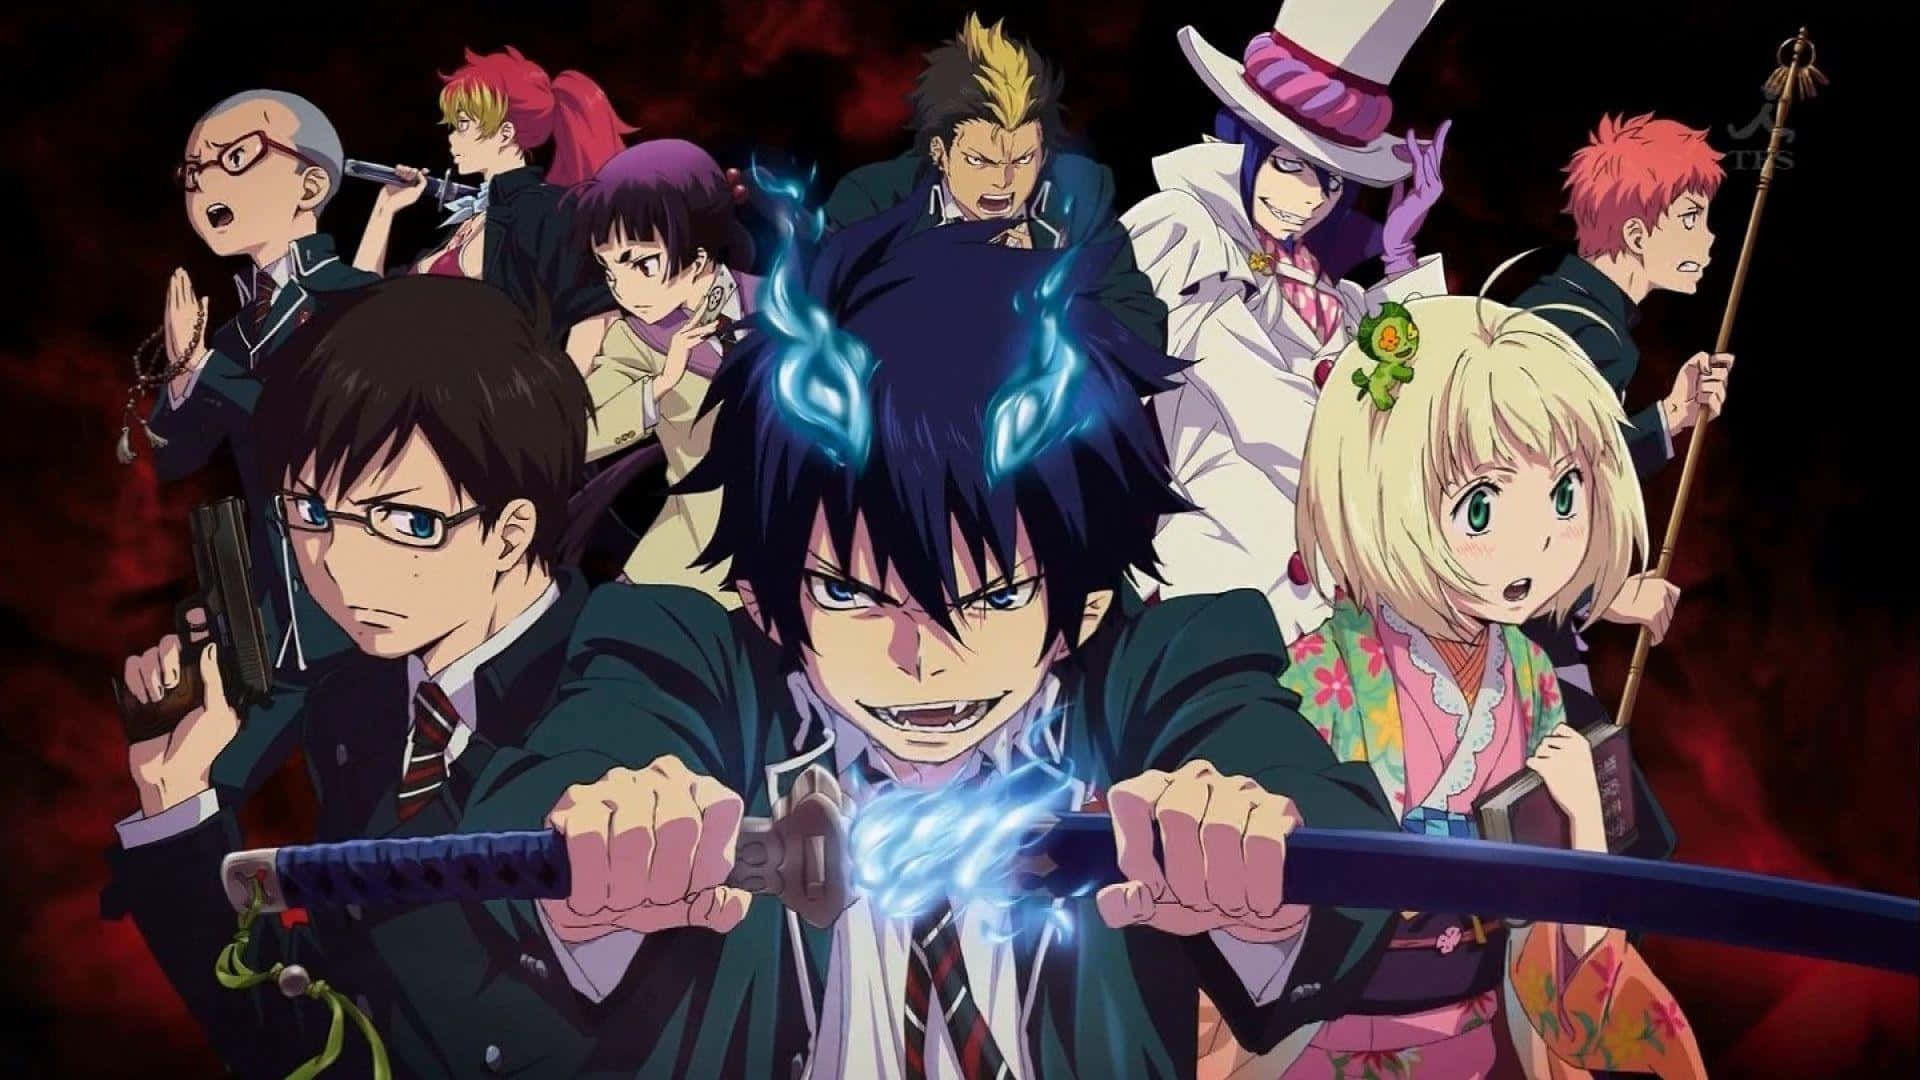 Get ready for an action-packed ride with Blue Exorcist